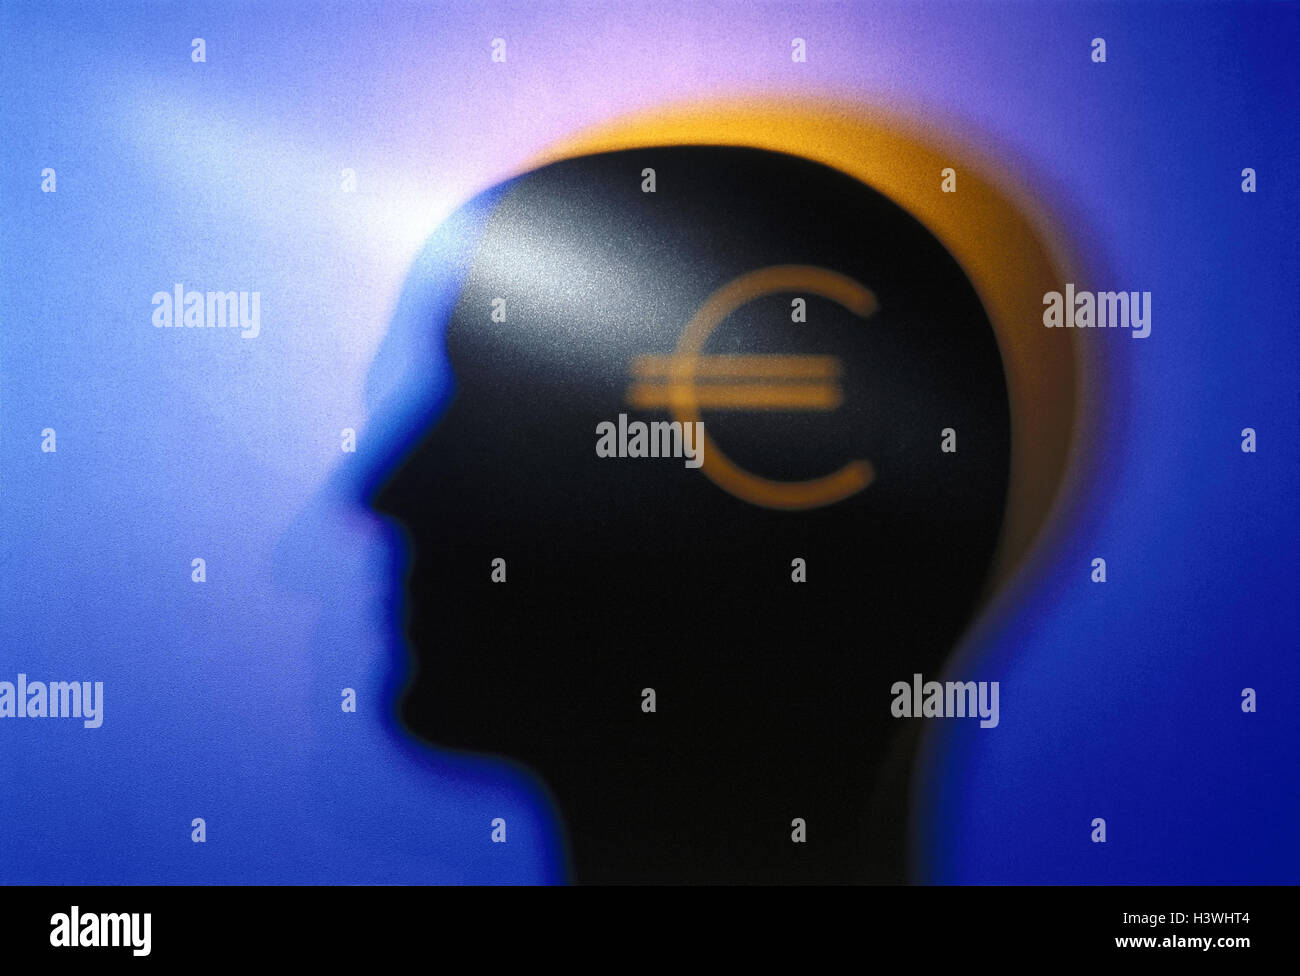 Silhouette, head, currency figure, euro, Composing, icon, rethink icon, think, thoughts, consider, think, conversion, changeover, politics, European monetary union, the EU, single currency, currency unit, Europe, blur Stock Photo